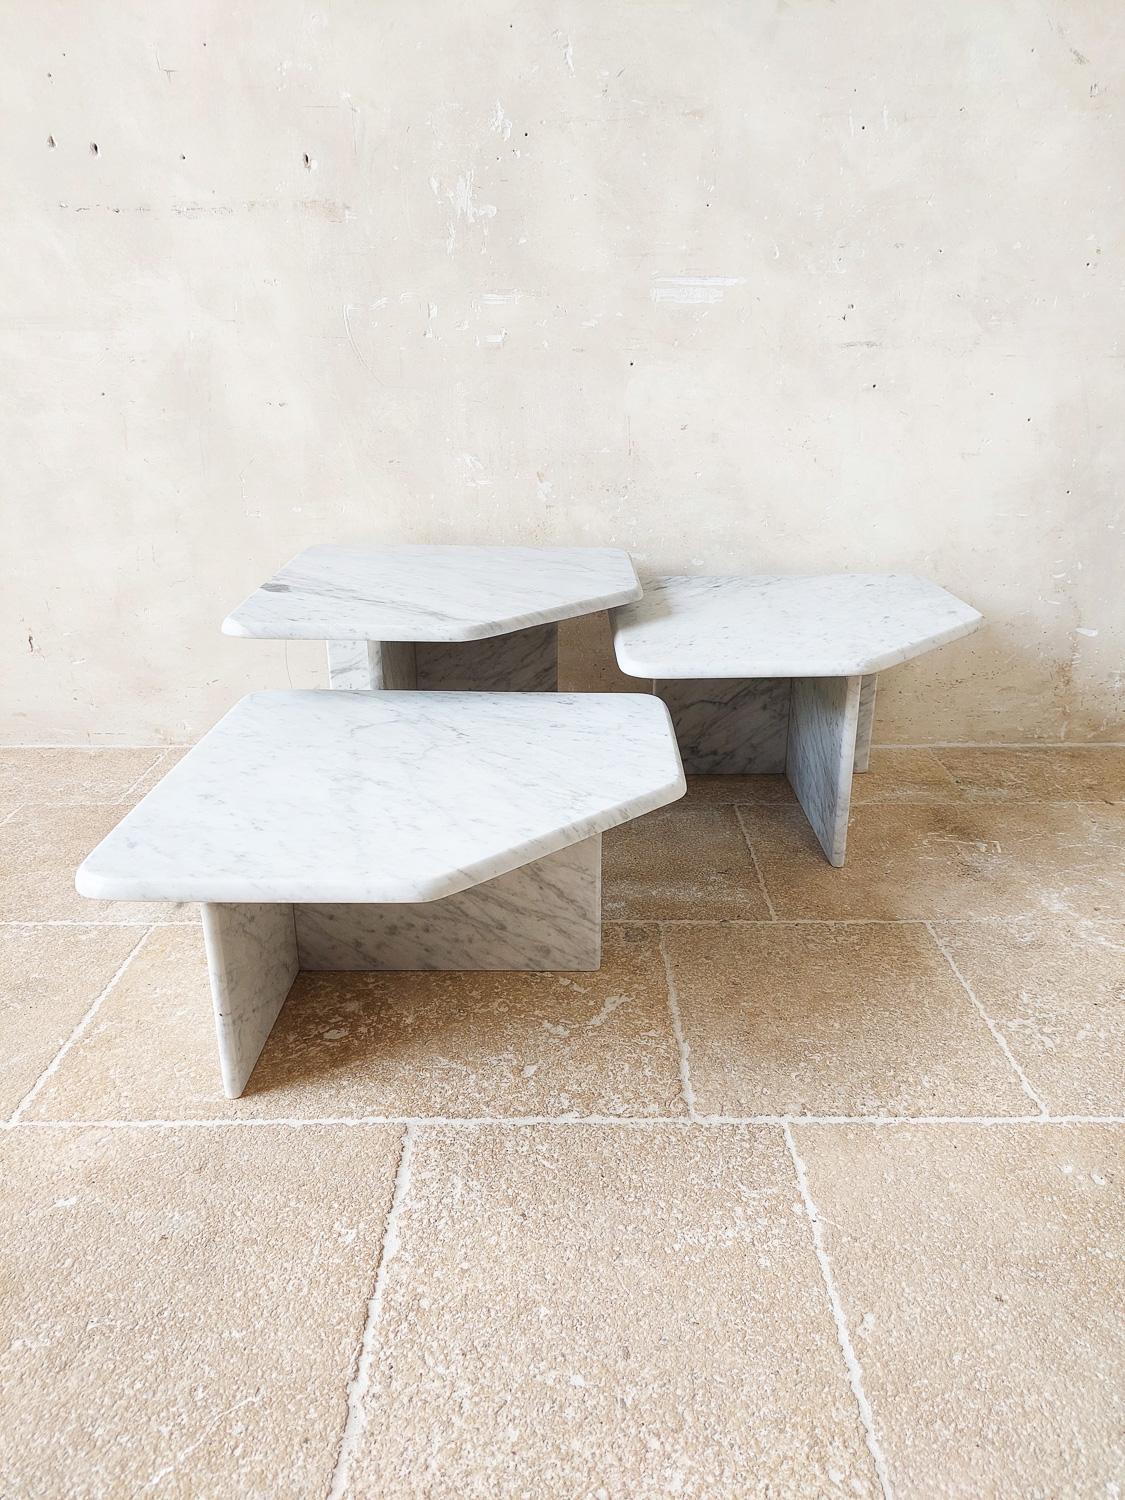 Set of 3 Hollywood Regency, vintage design Carrara white marble coffee tables or side tables, to be used as a group. From the 1970s.

Measures: L 60 x W 60 cm
in 3 heights: 40 cm, 35 cm and 30 cm.